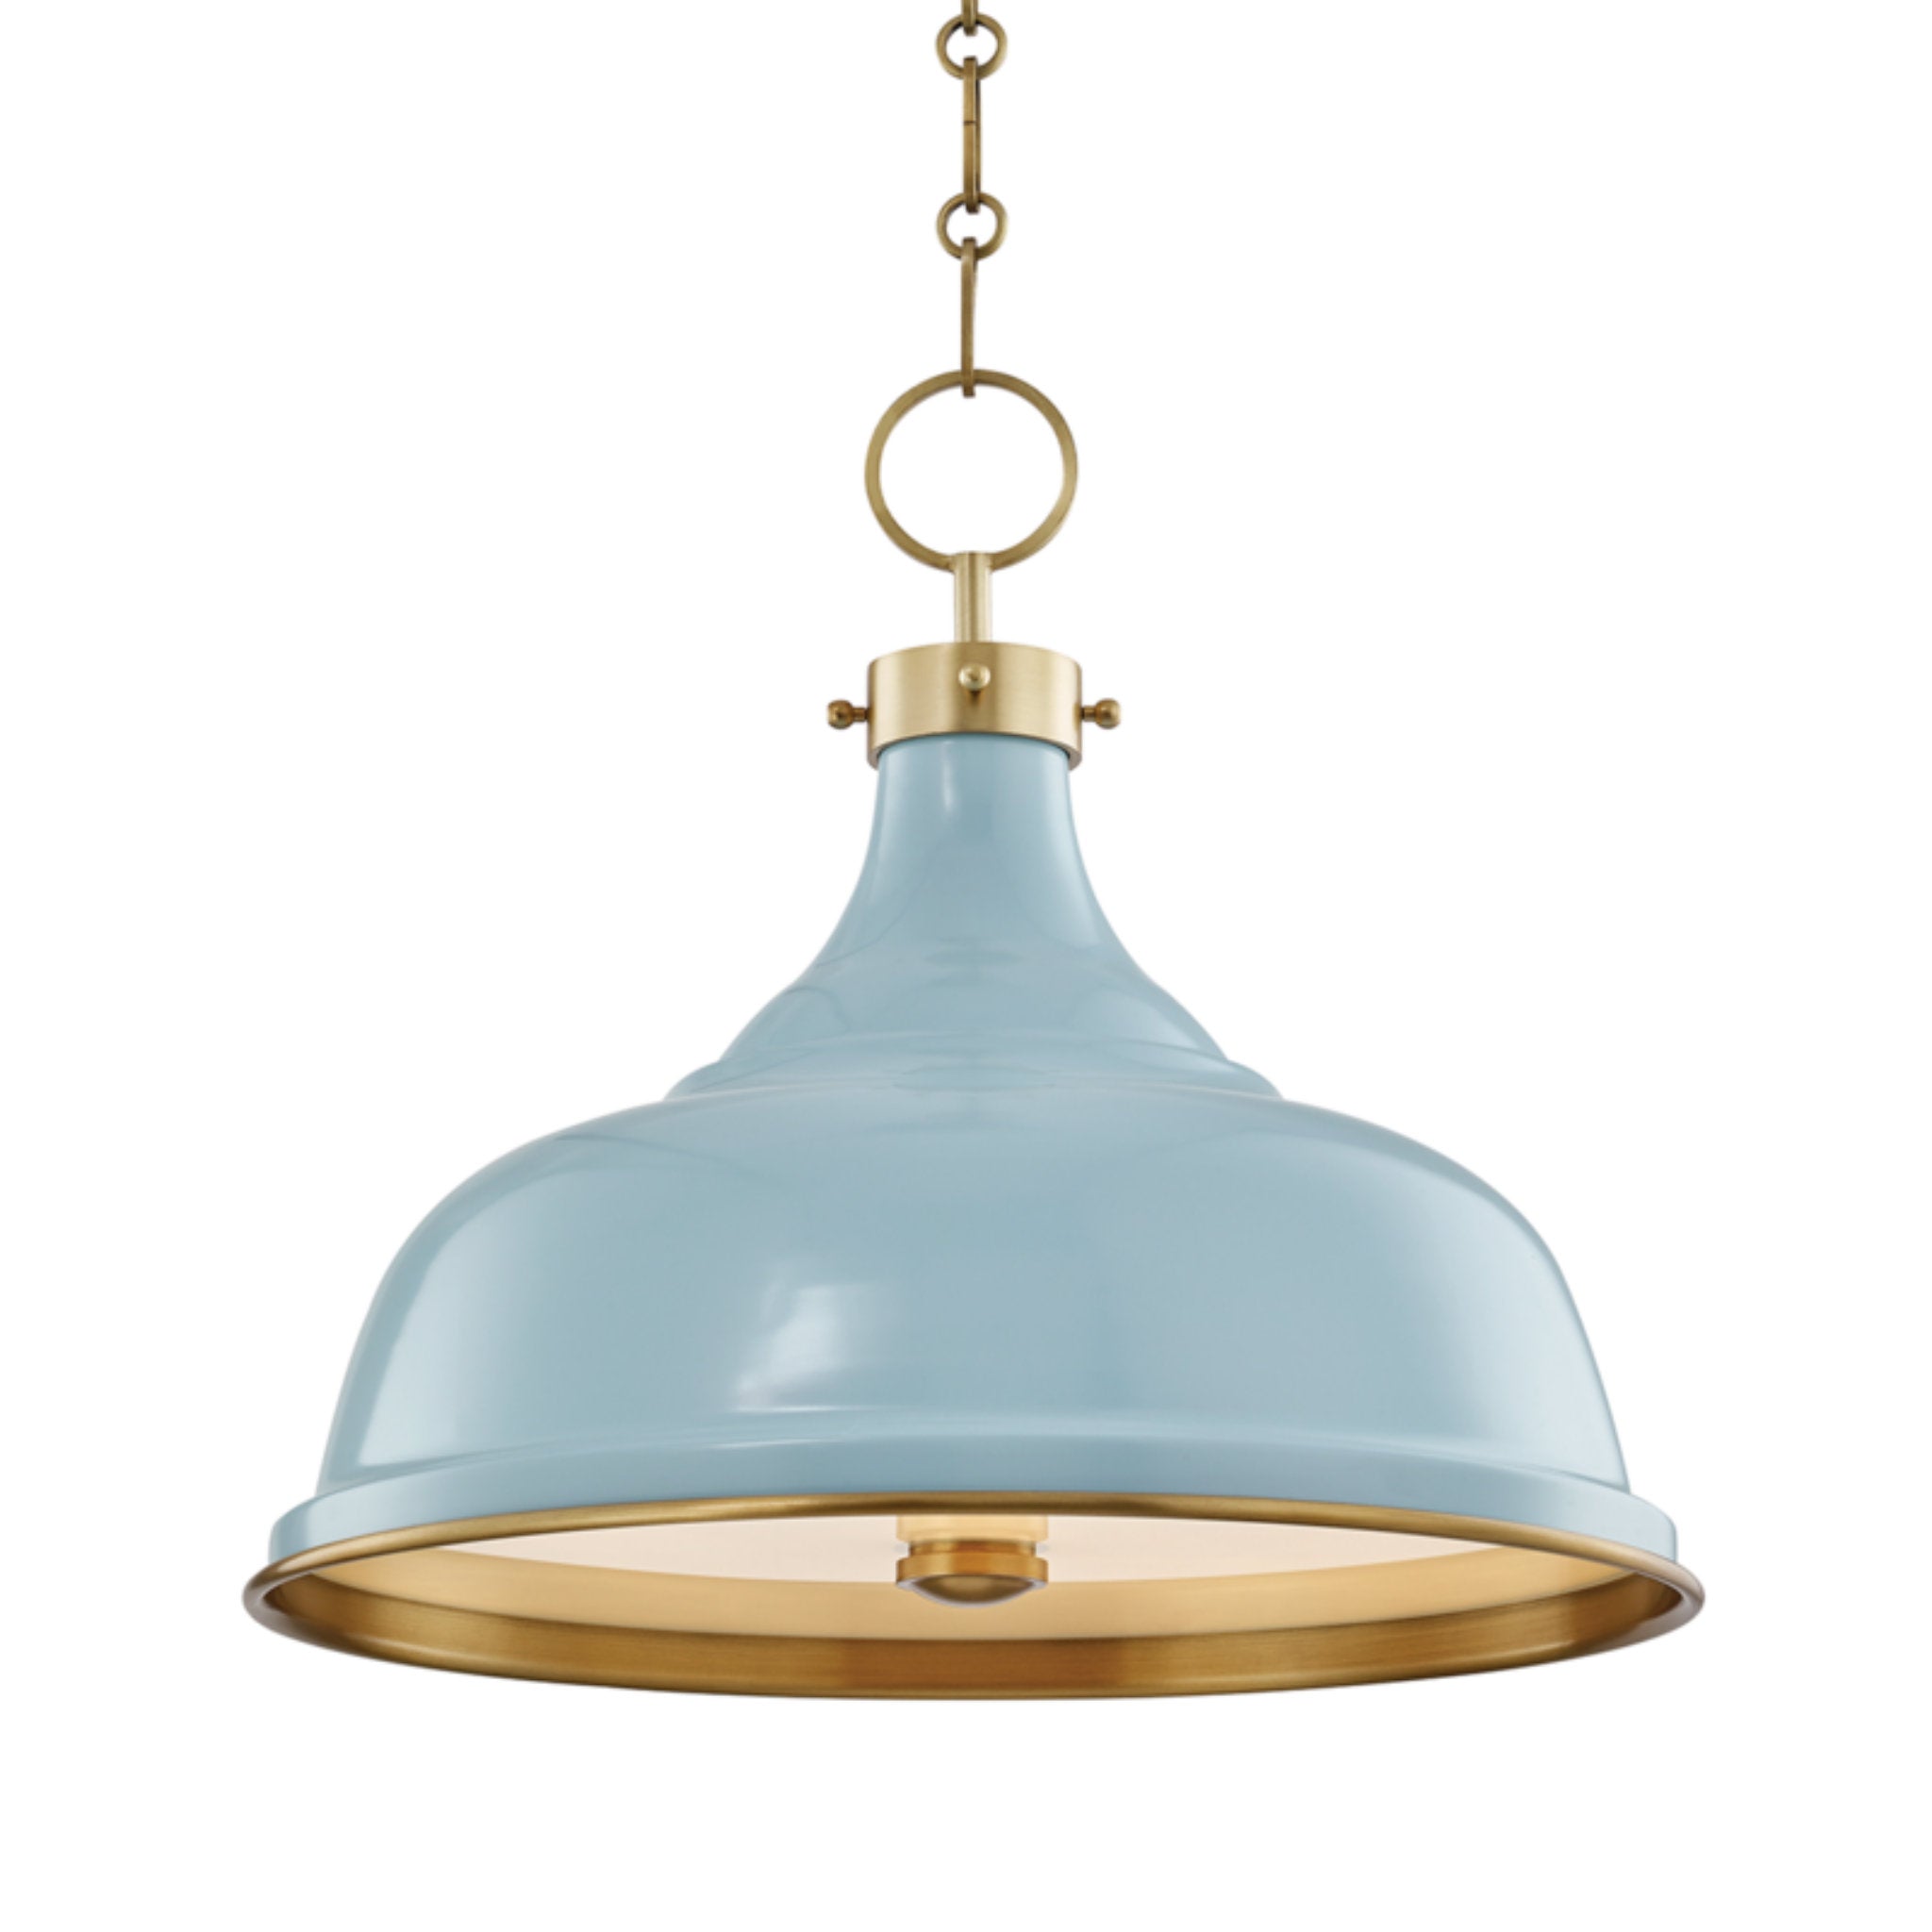 Painted No.1 3 Light Pendant in Aged Brass/blue Bird by Mark D. Sikes